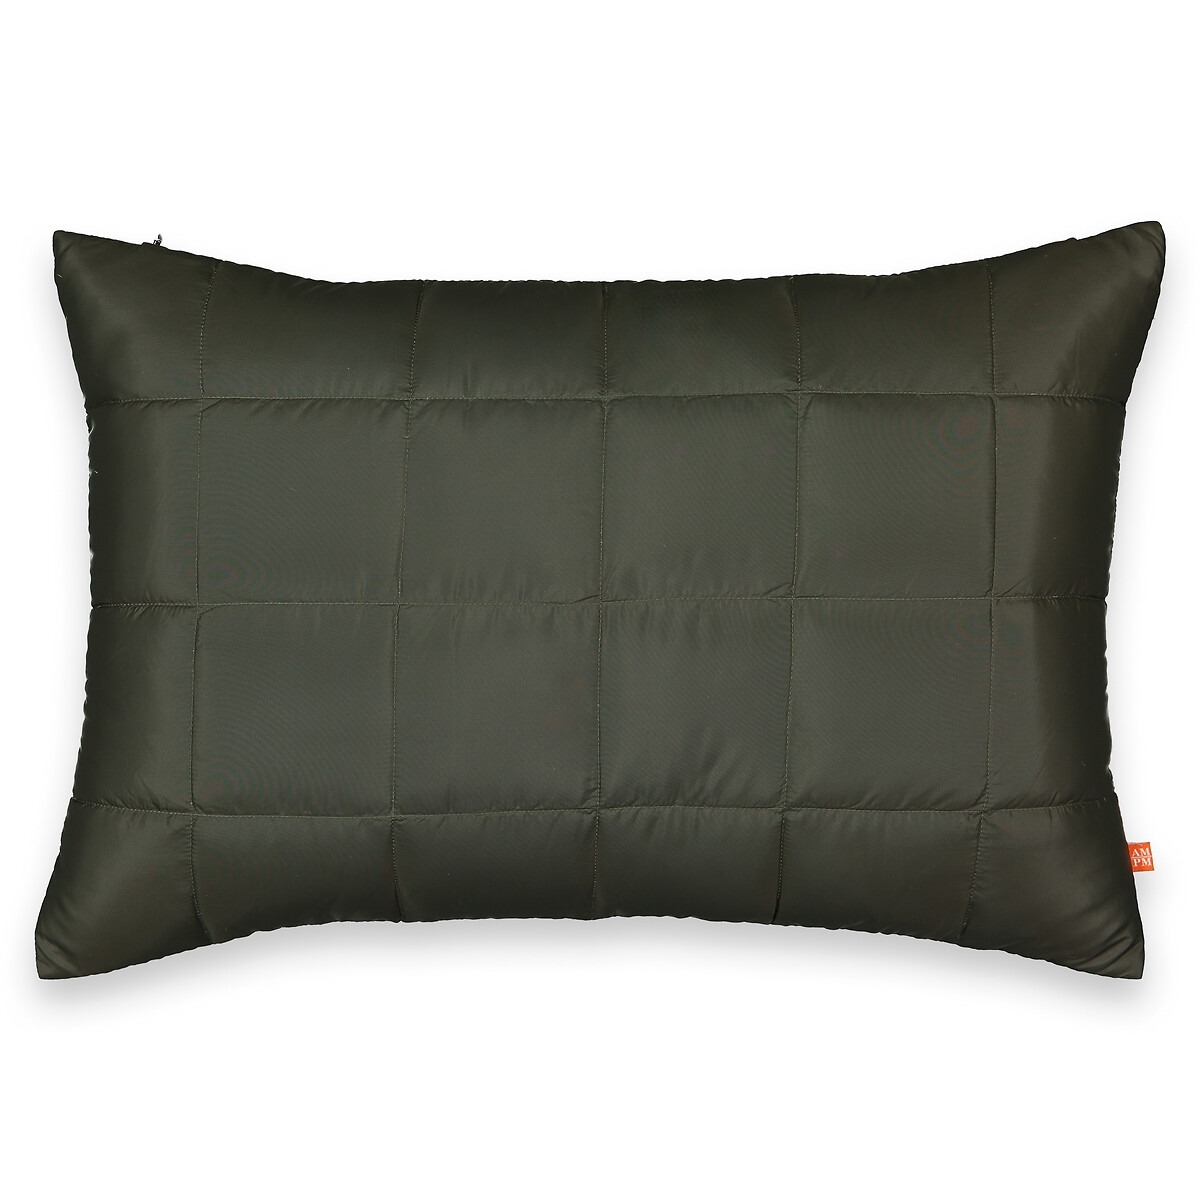 Couning Quilted Cushion Cover - image 1